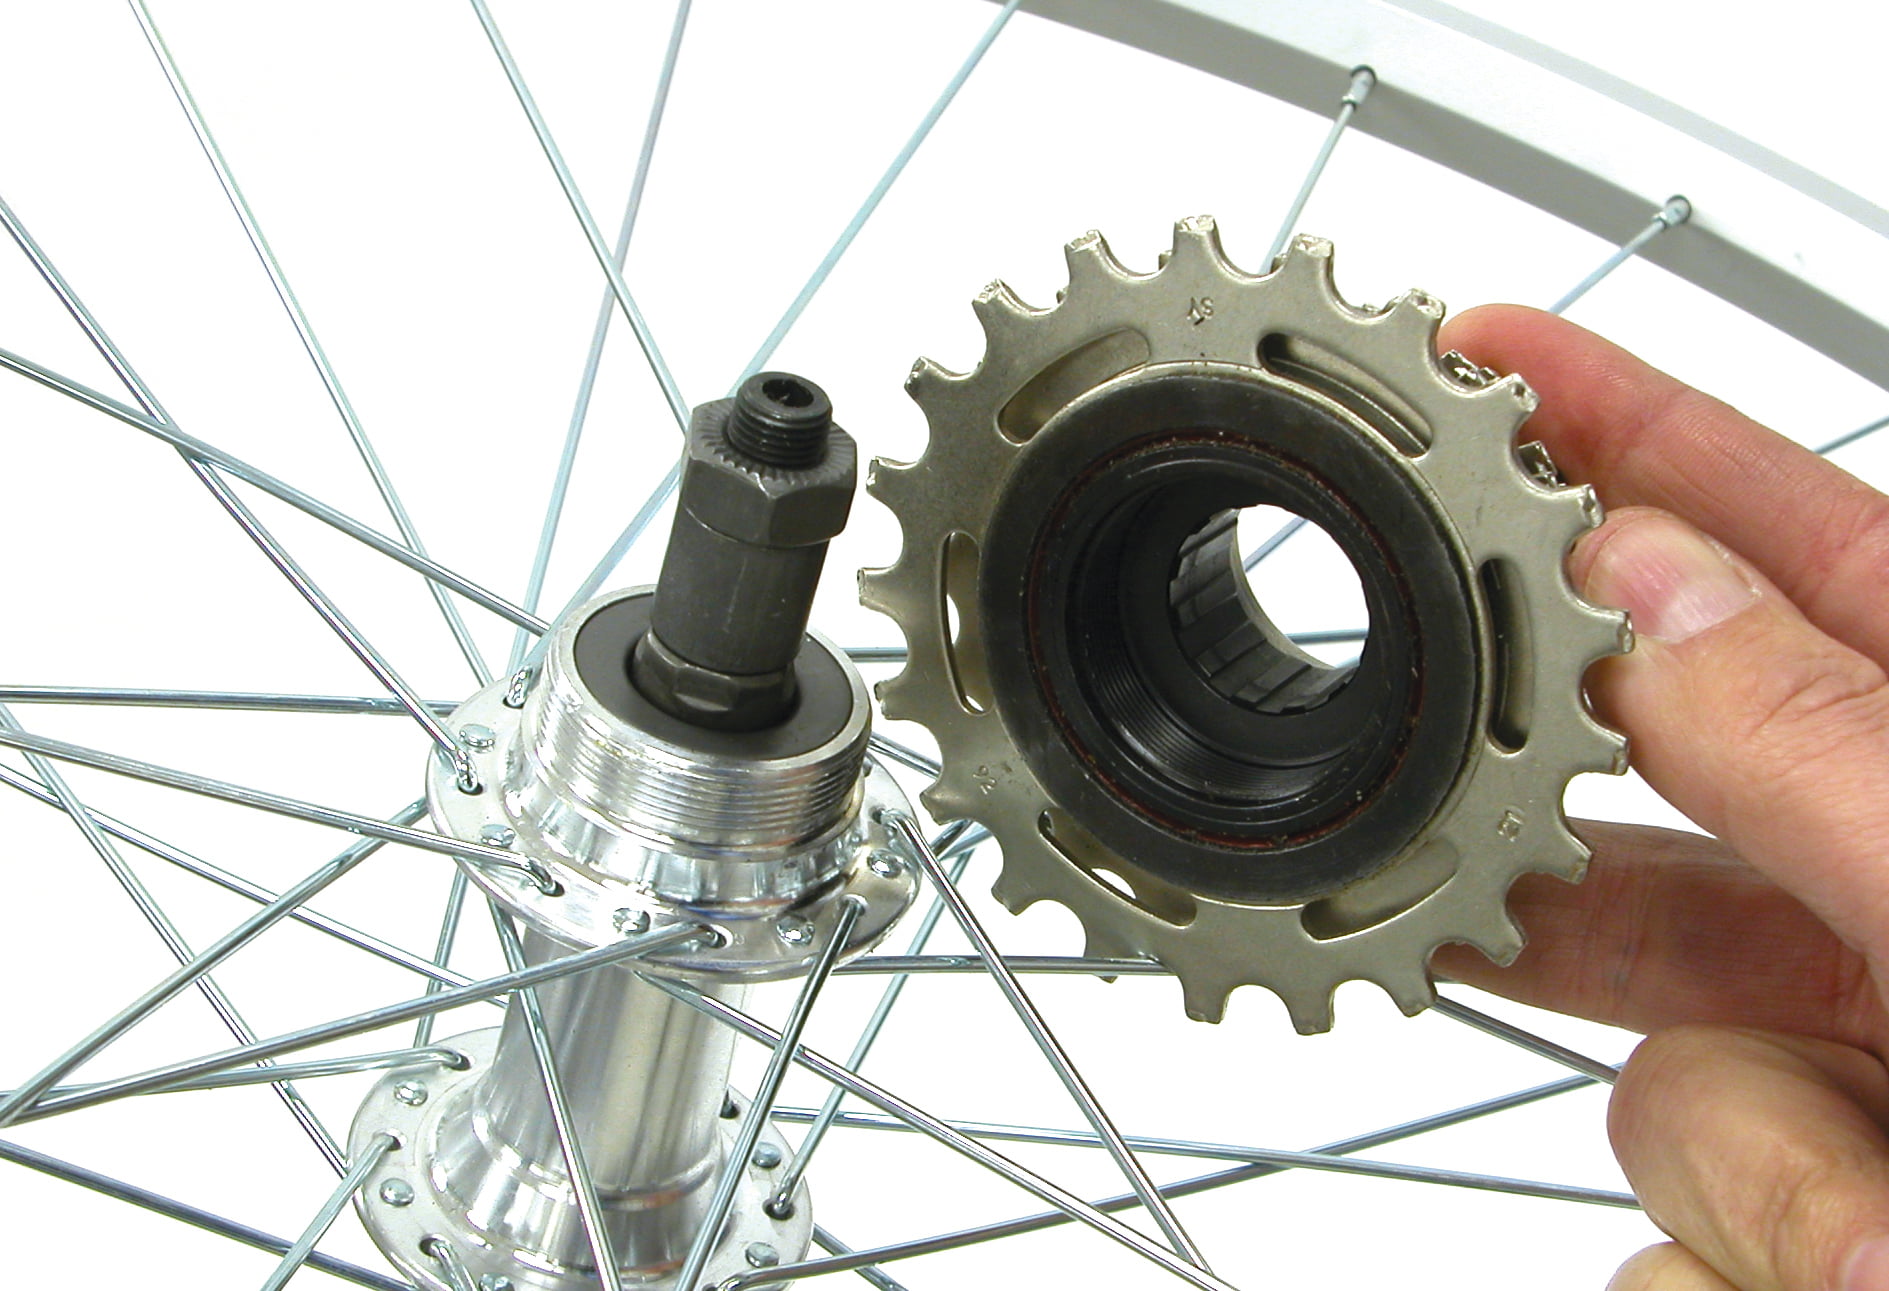 Freewheel rear hub with threads, and freewheel sprockets that are screwed onto it.